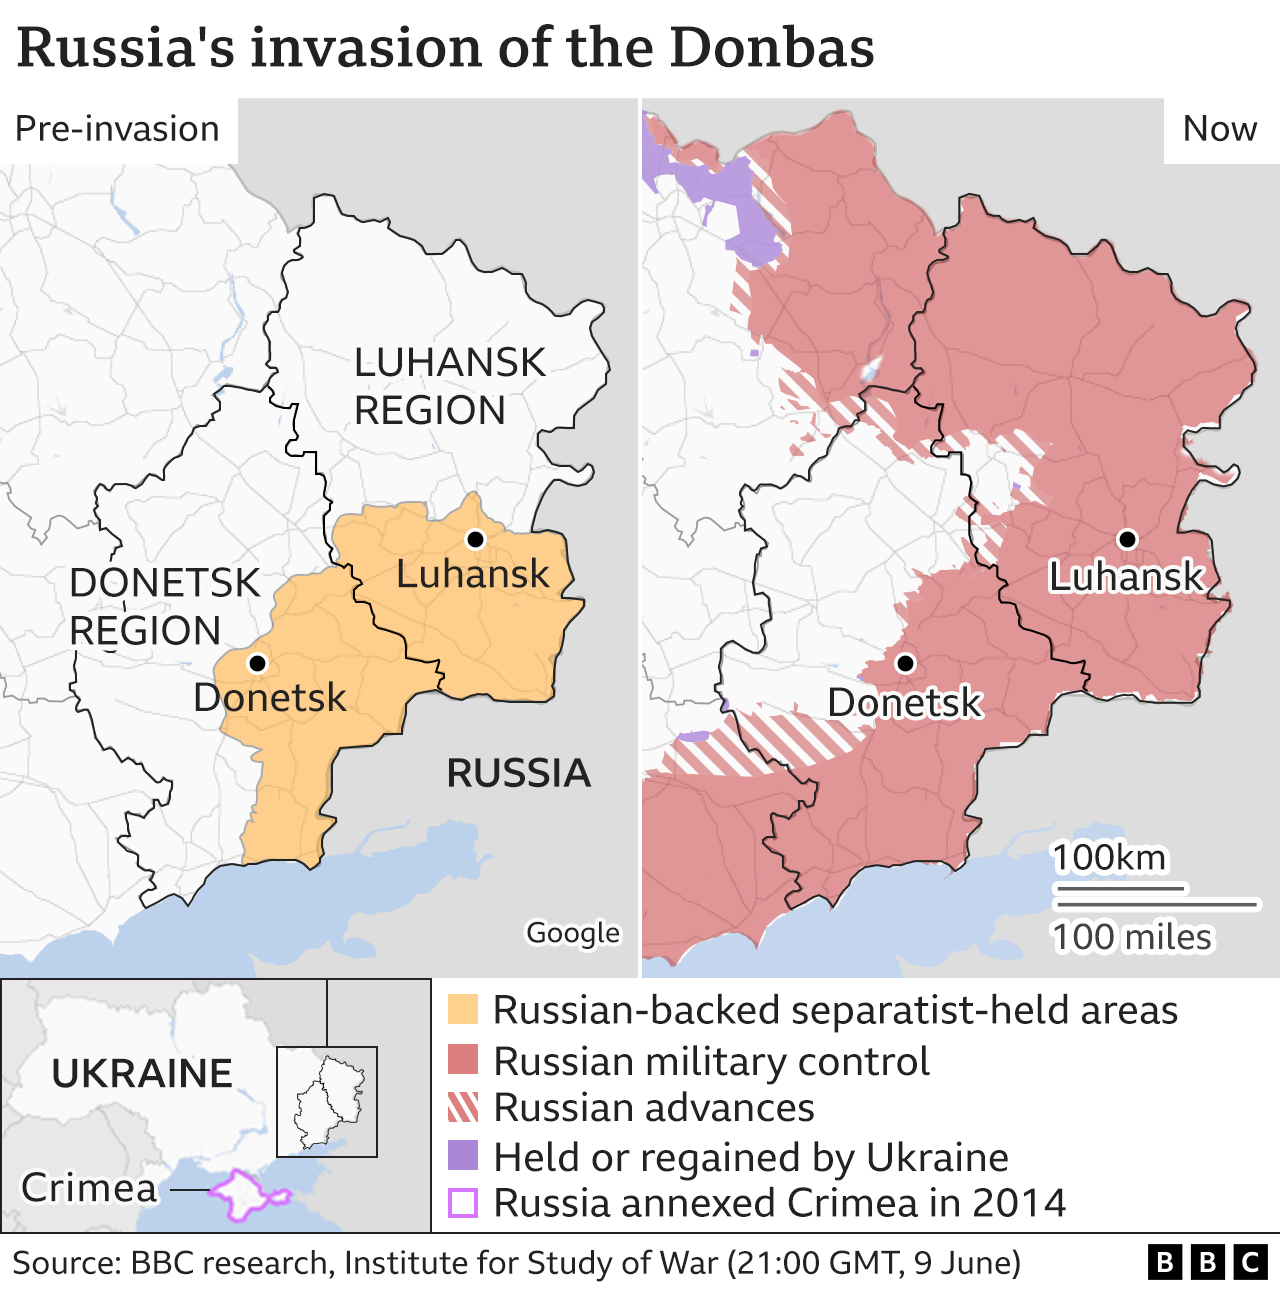 Map showing Donbas region before and after invasion, updated 10 June